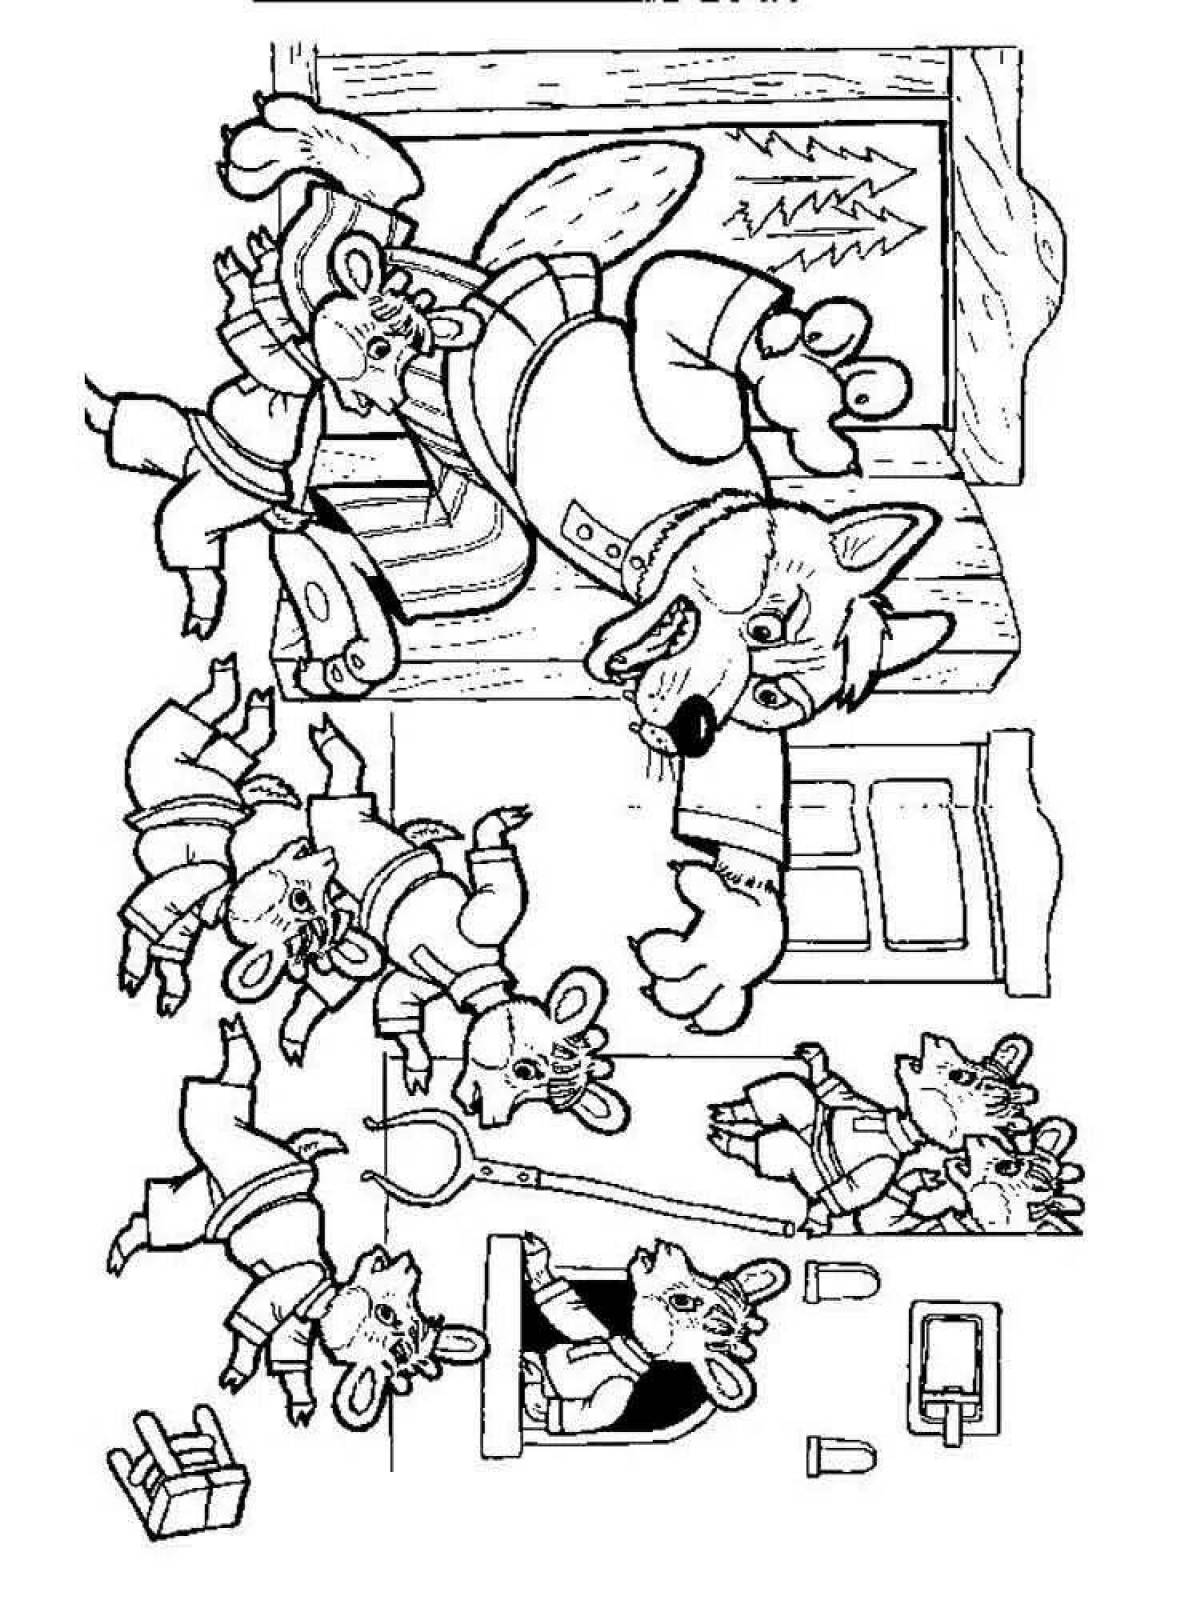 Fun coloring page 7 for kids